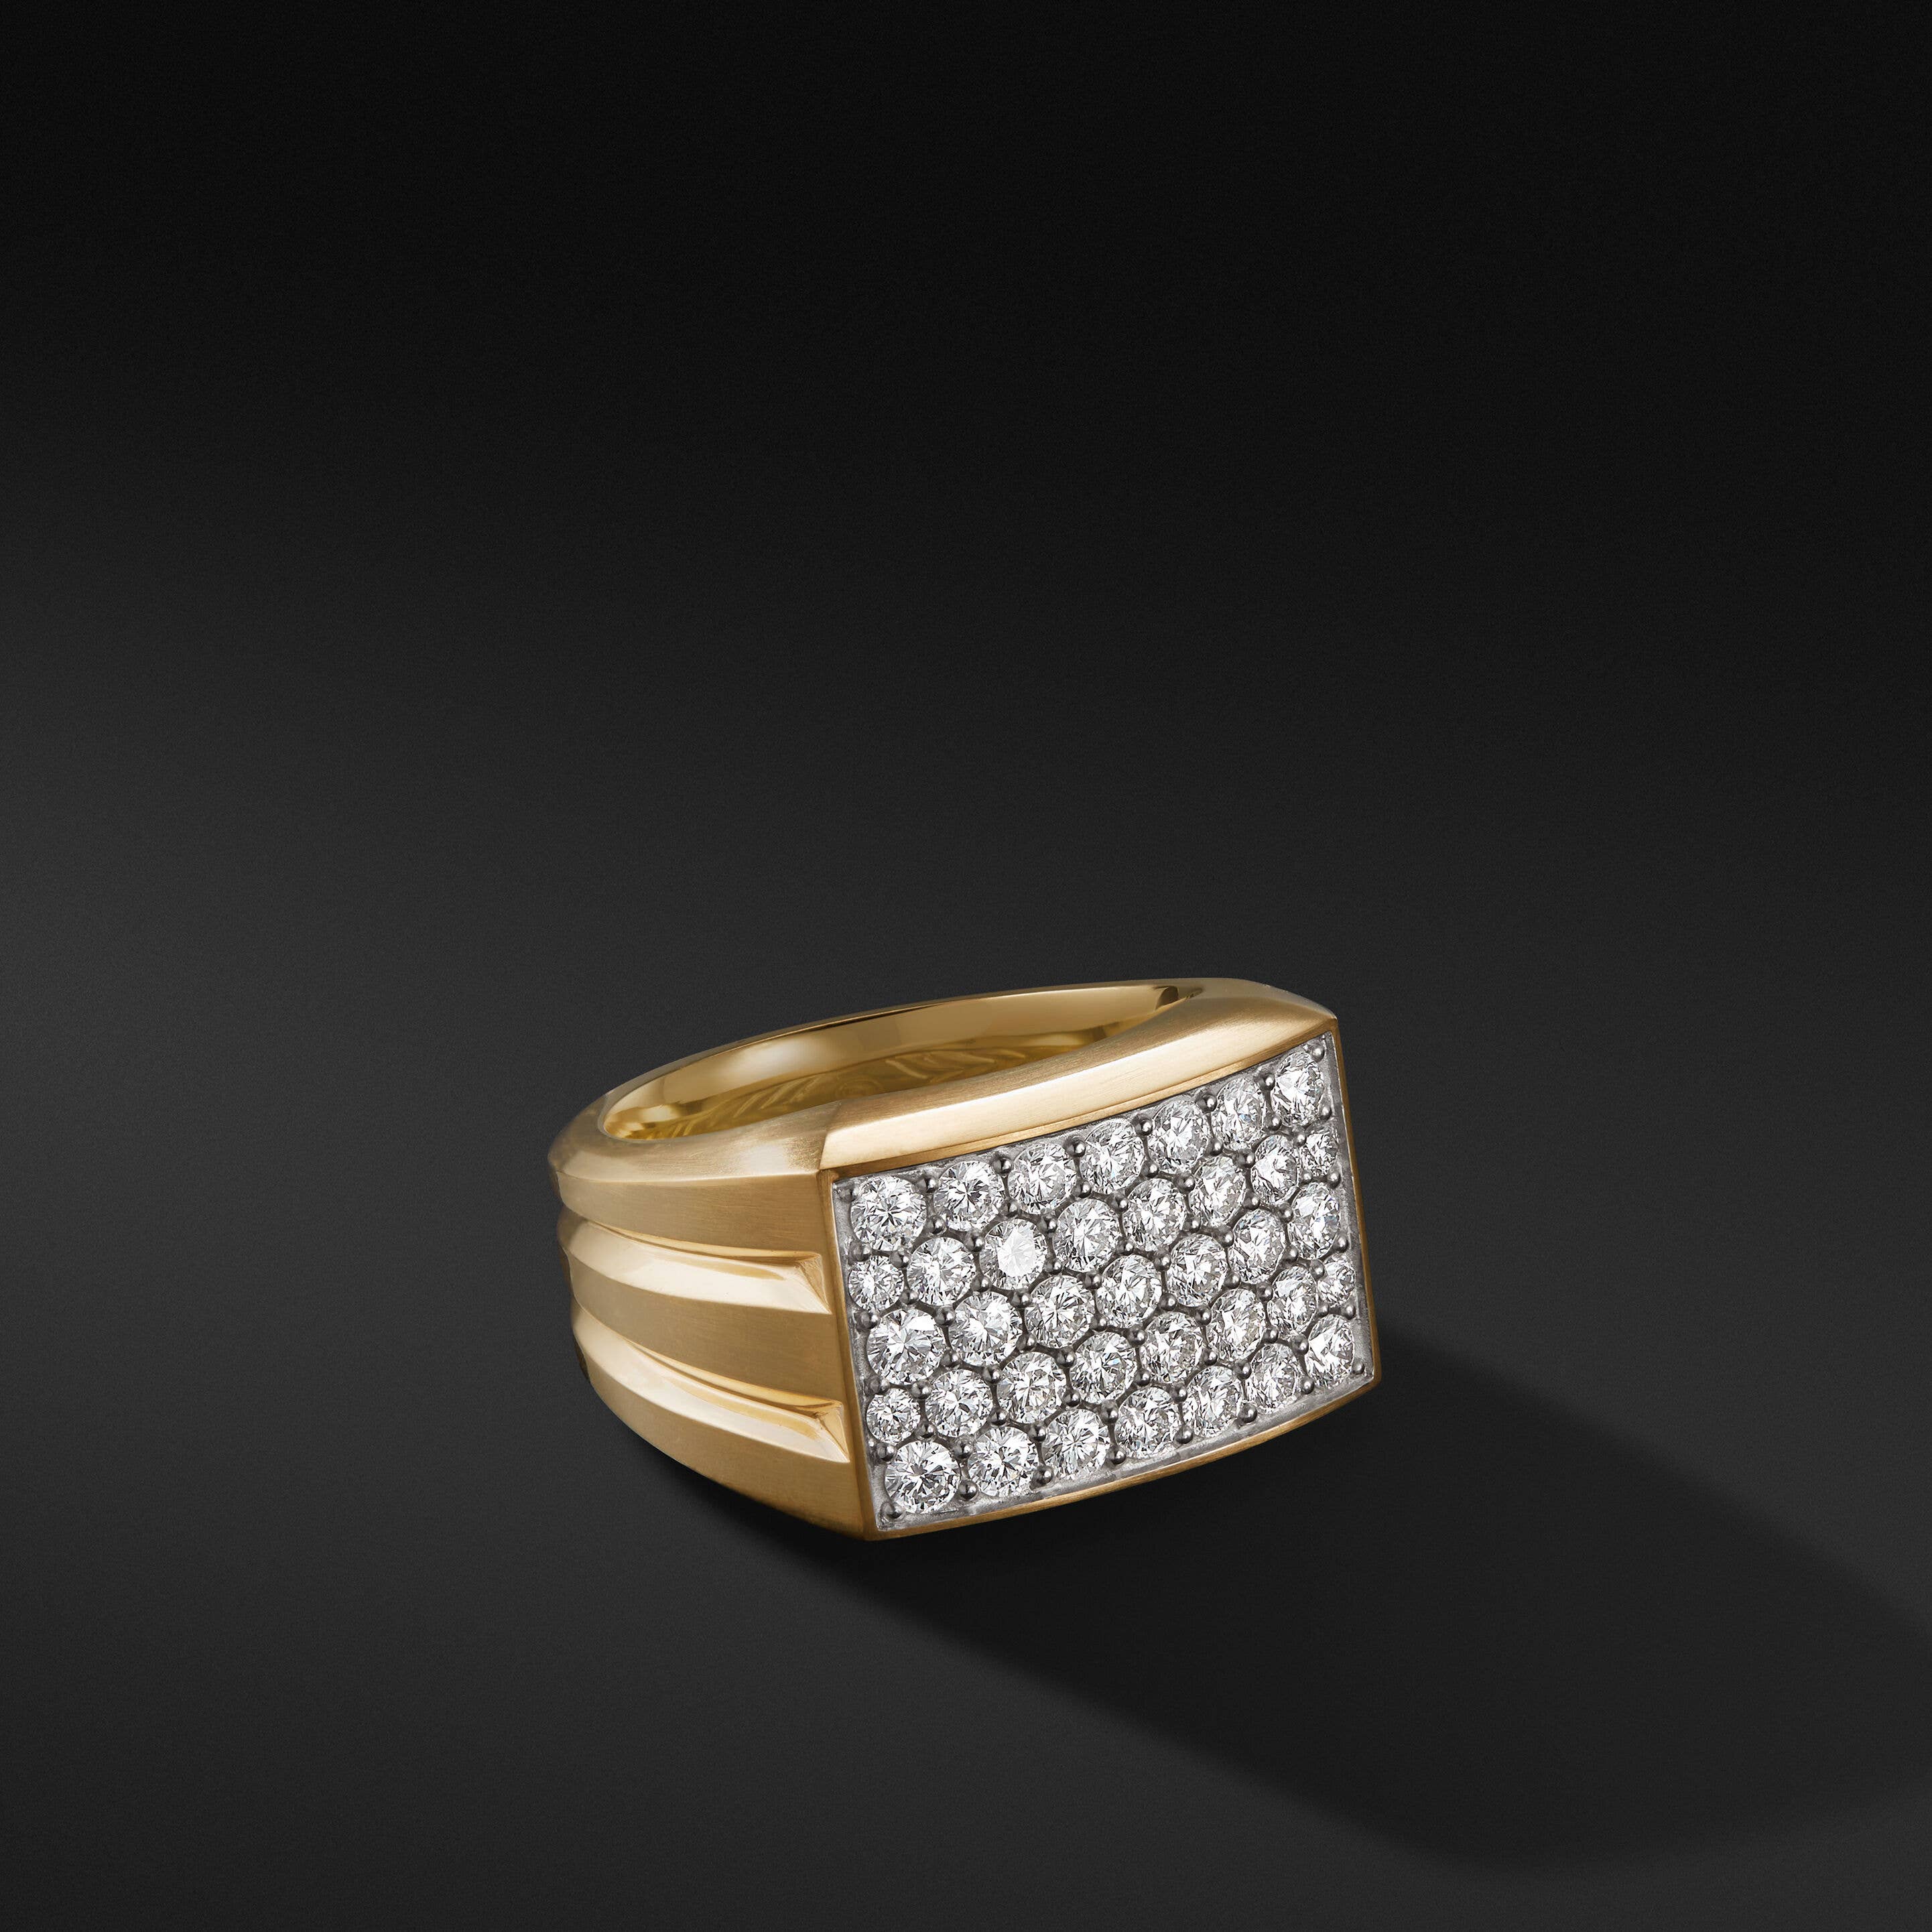 Beveled Signet Ring in 18K Yellow Gold with Pavé Diamonds